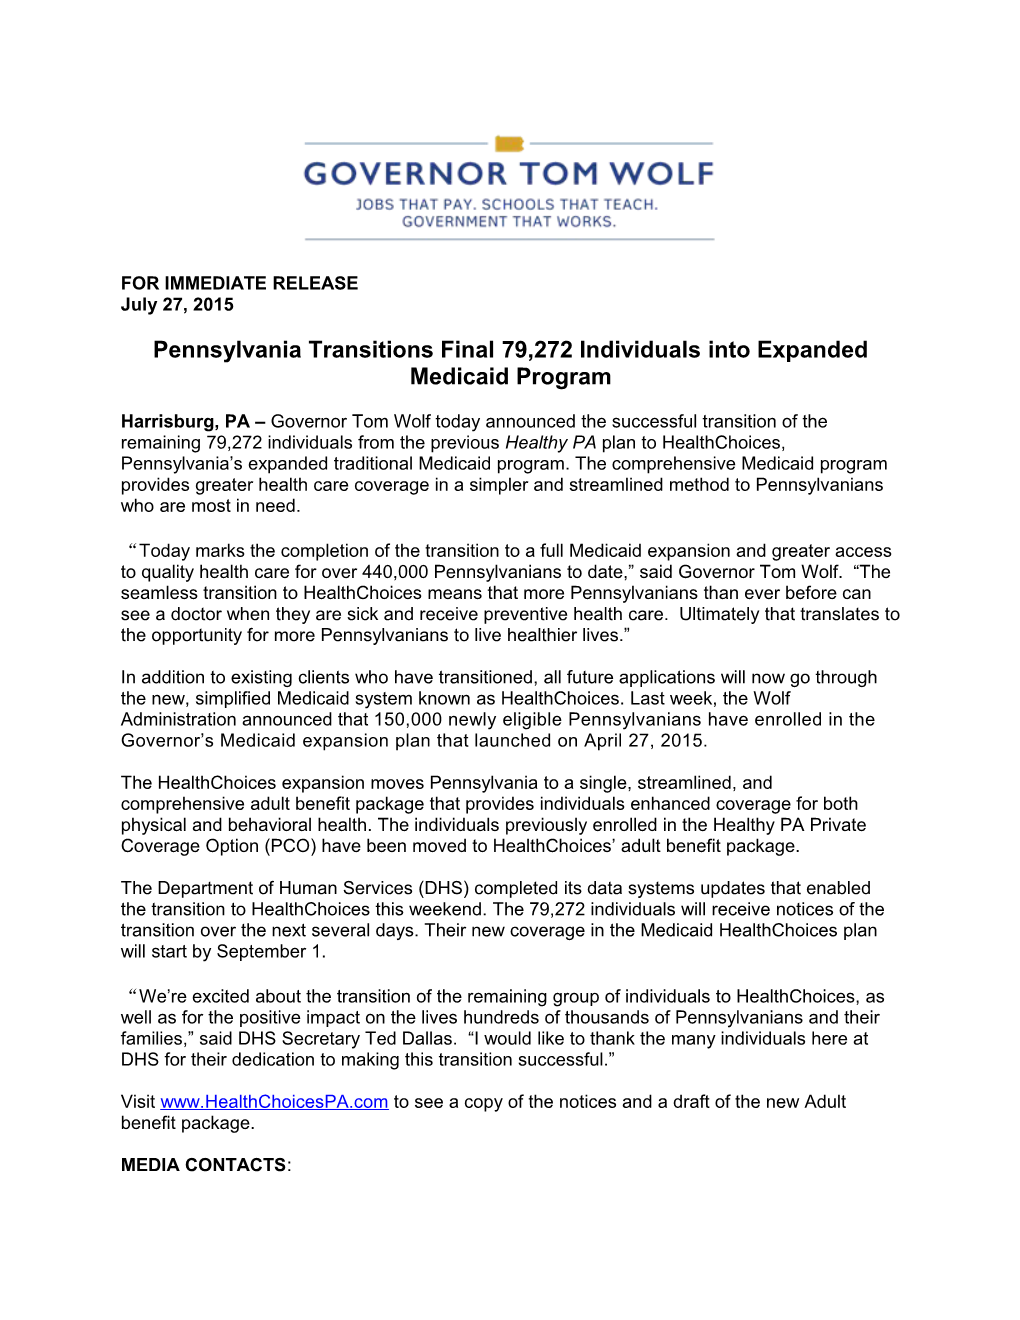 Pennsylvania Transitions Final 79,272 Individuals Into Expanded Medicaid Program